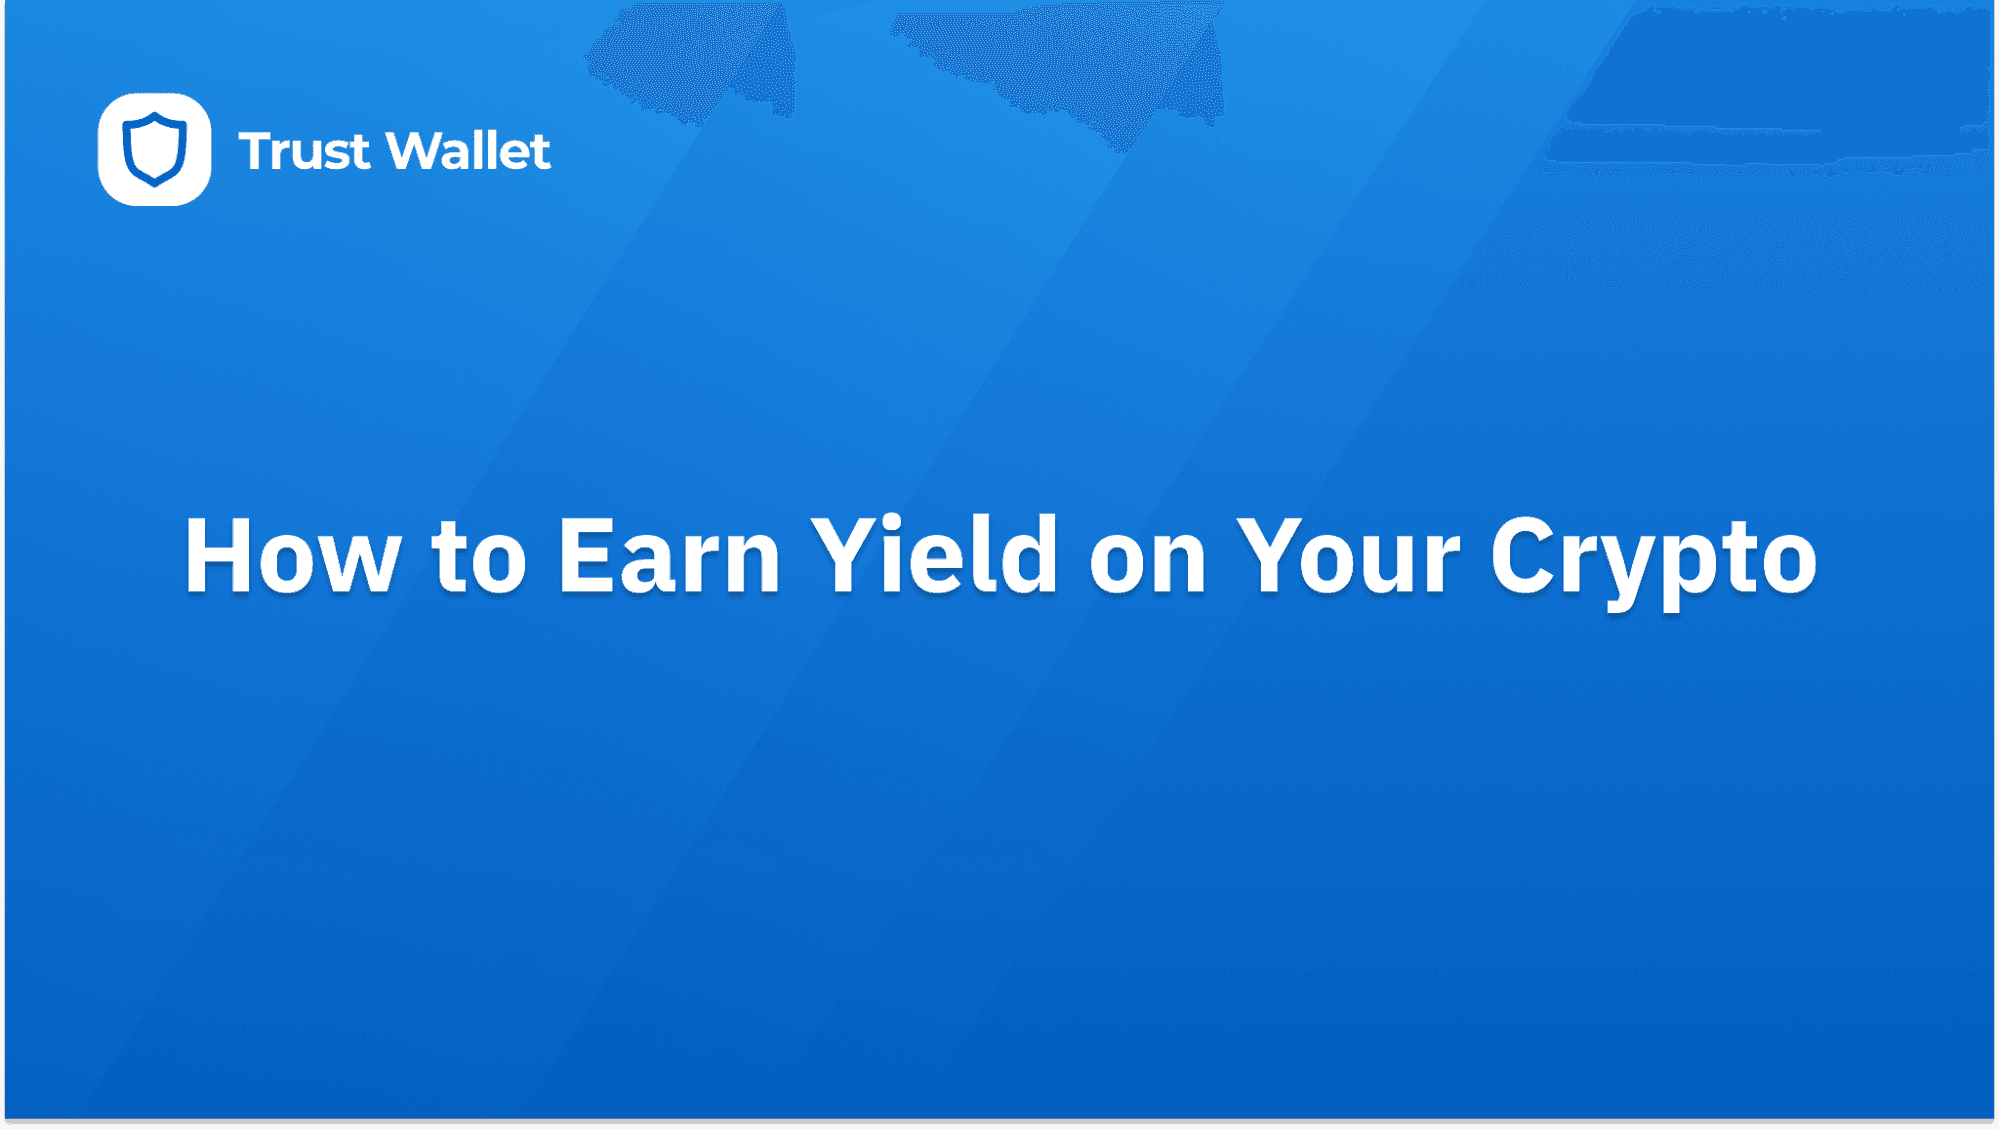 How to Earn Yield on Your Crypto